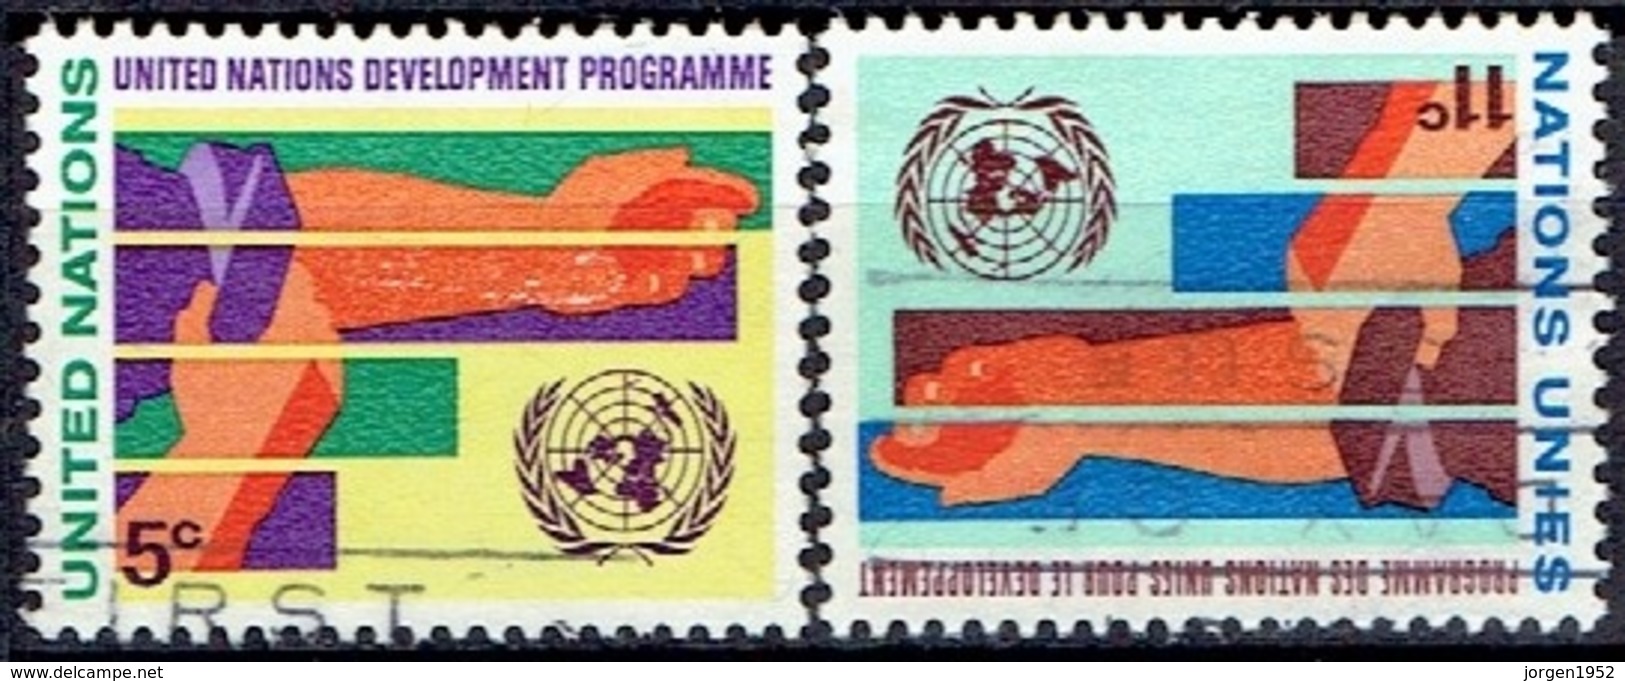 UNITED NATIONS # NEW YORK FROM 1967 STAMPWORLD 174-75 - Oblitérés